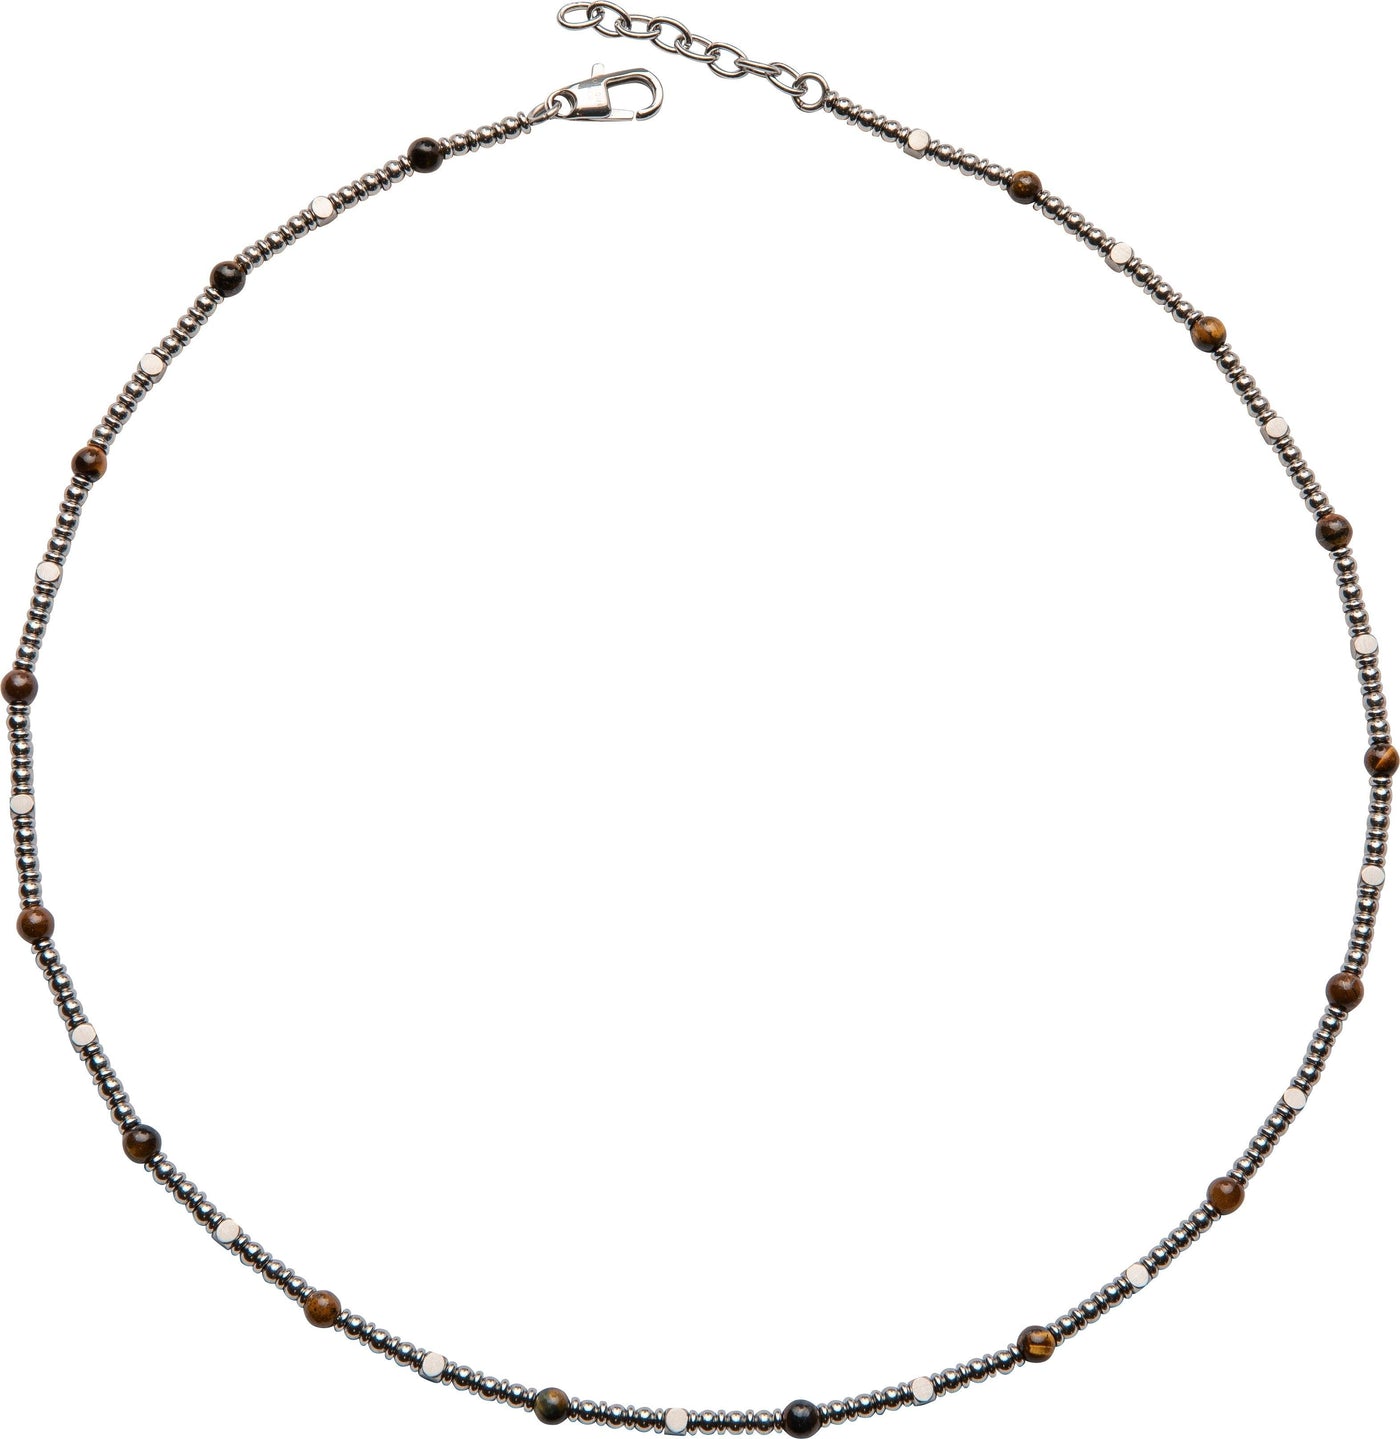 Unique & Co Tiger's Eye or Lapis Beads Stainless Steel Necklace - Rococo Jewellery